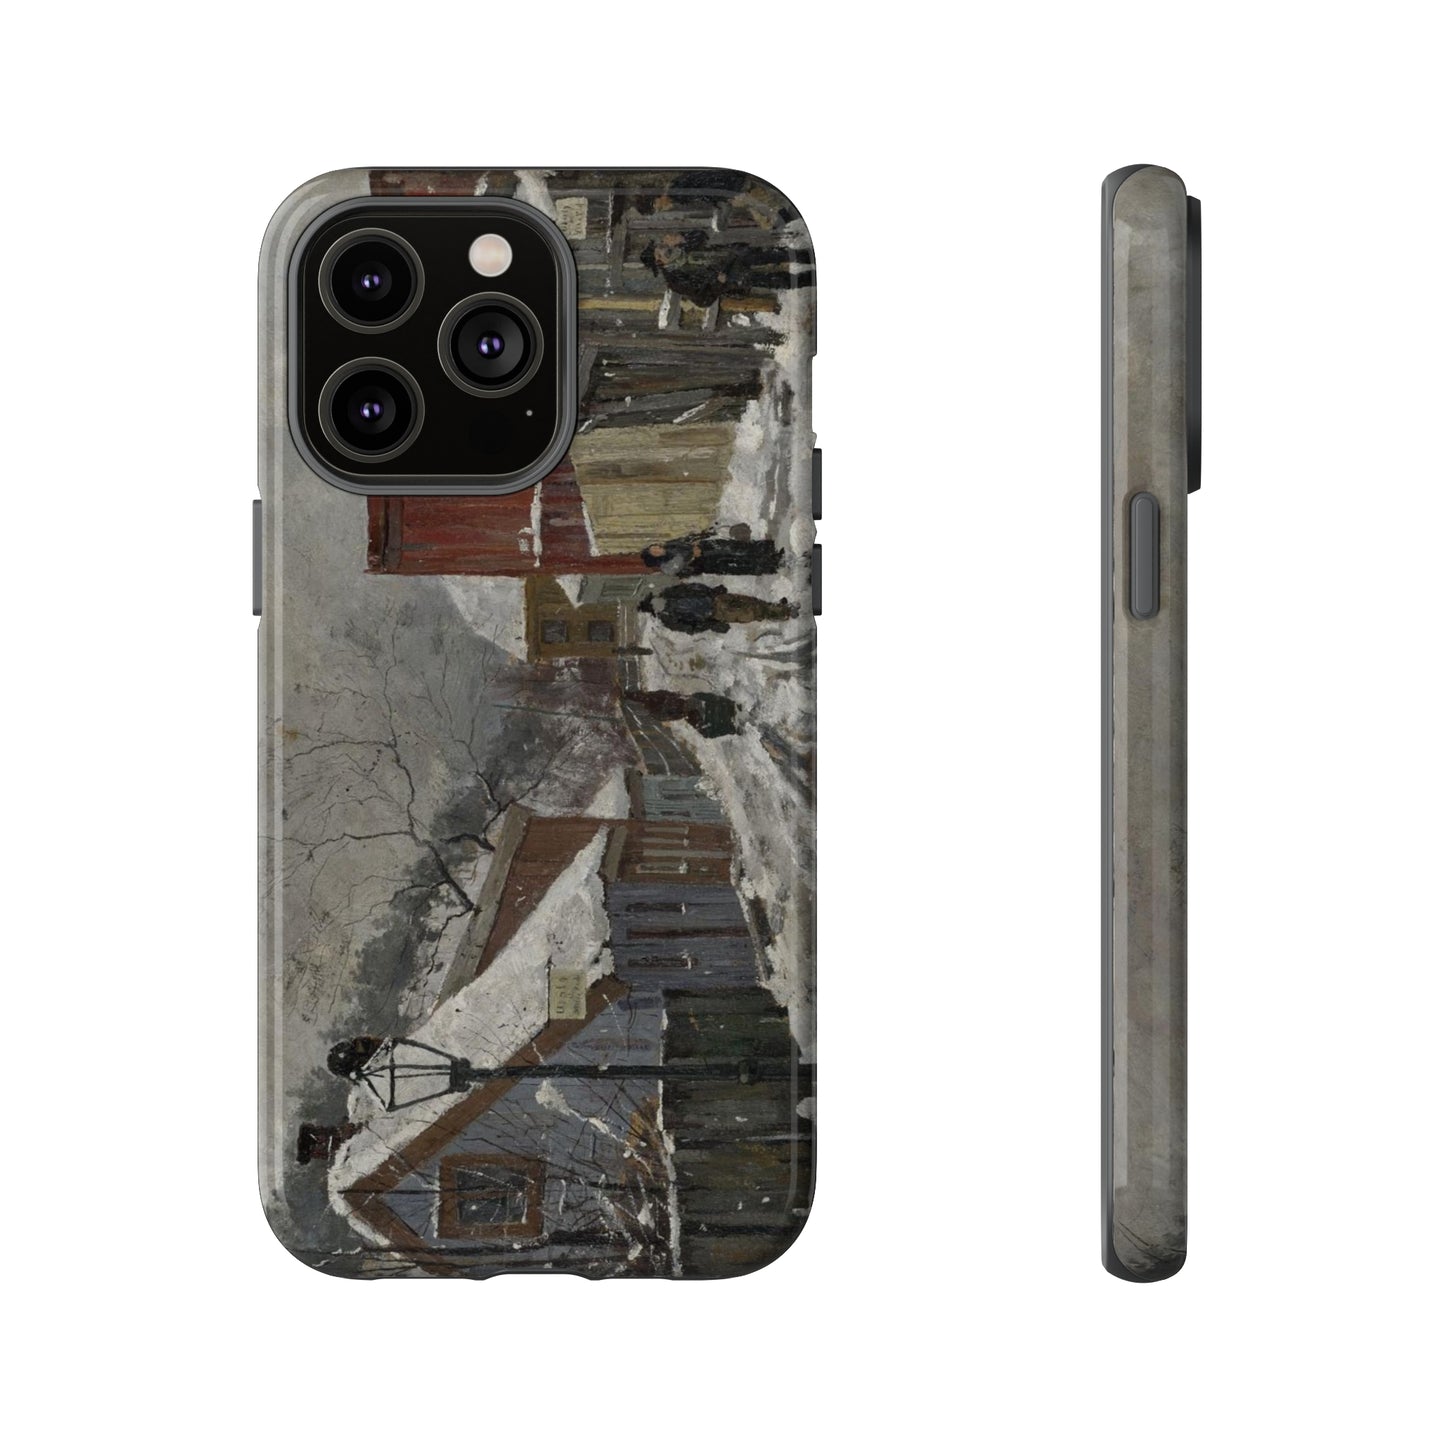 From Saxegardsgate by Edvard Munch - Cell Phone Case